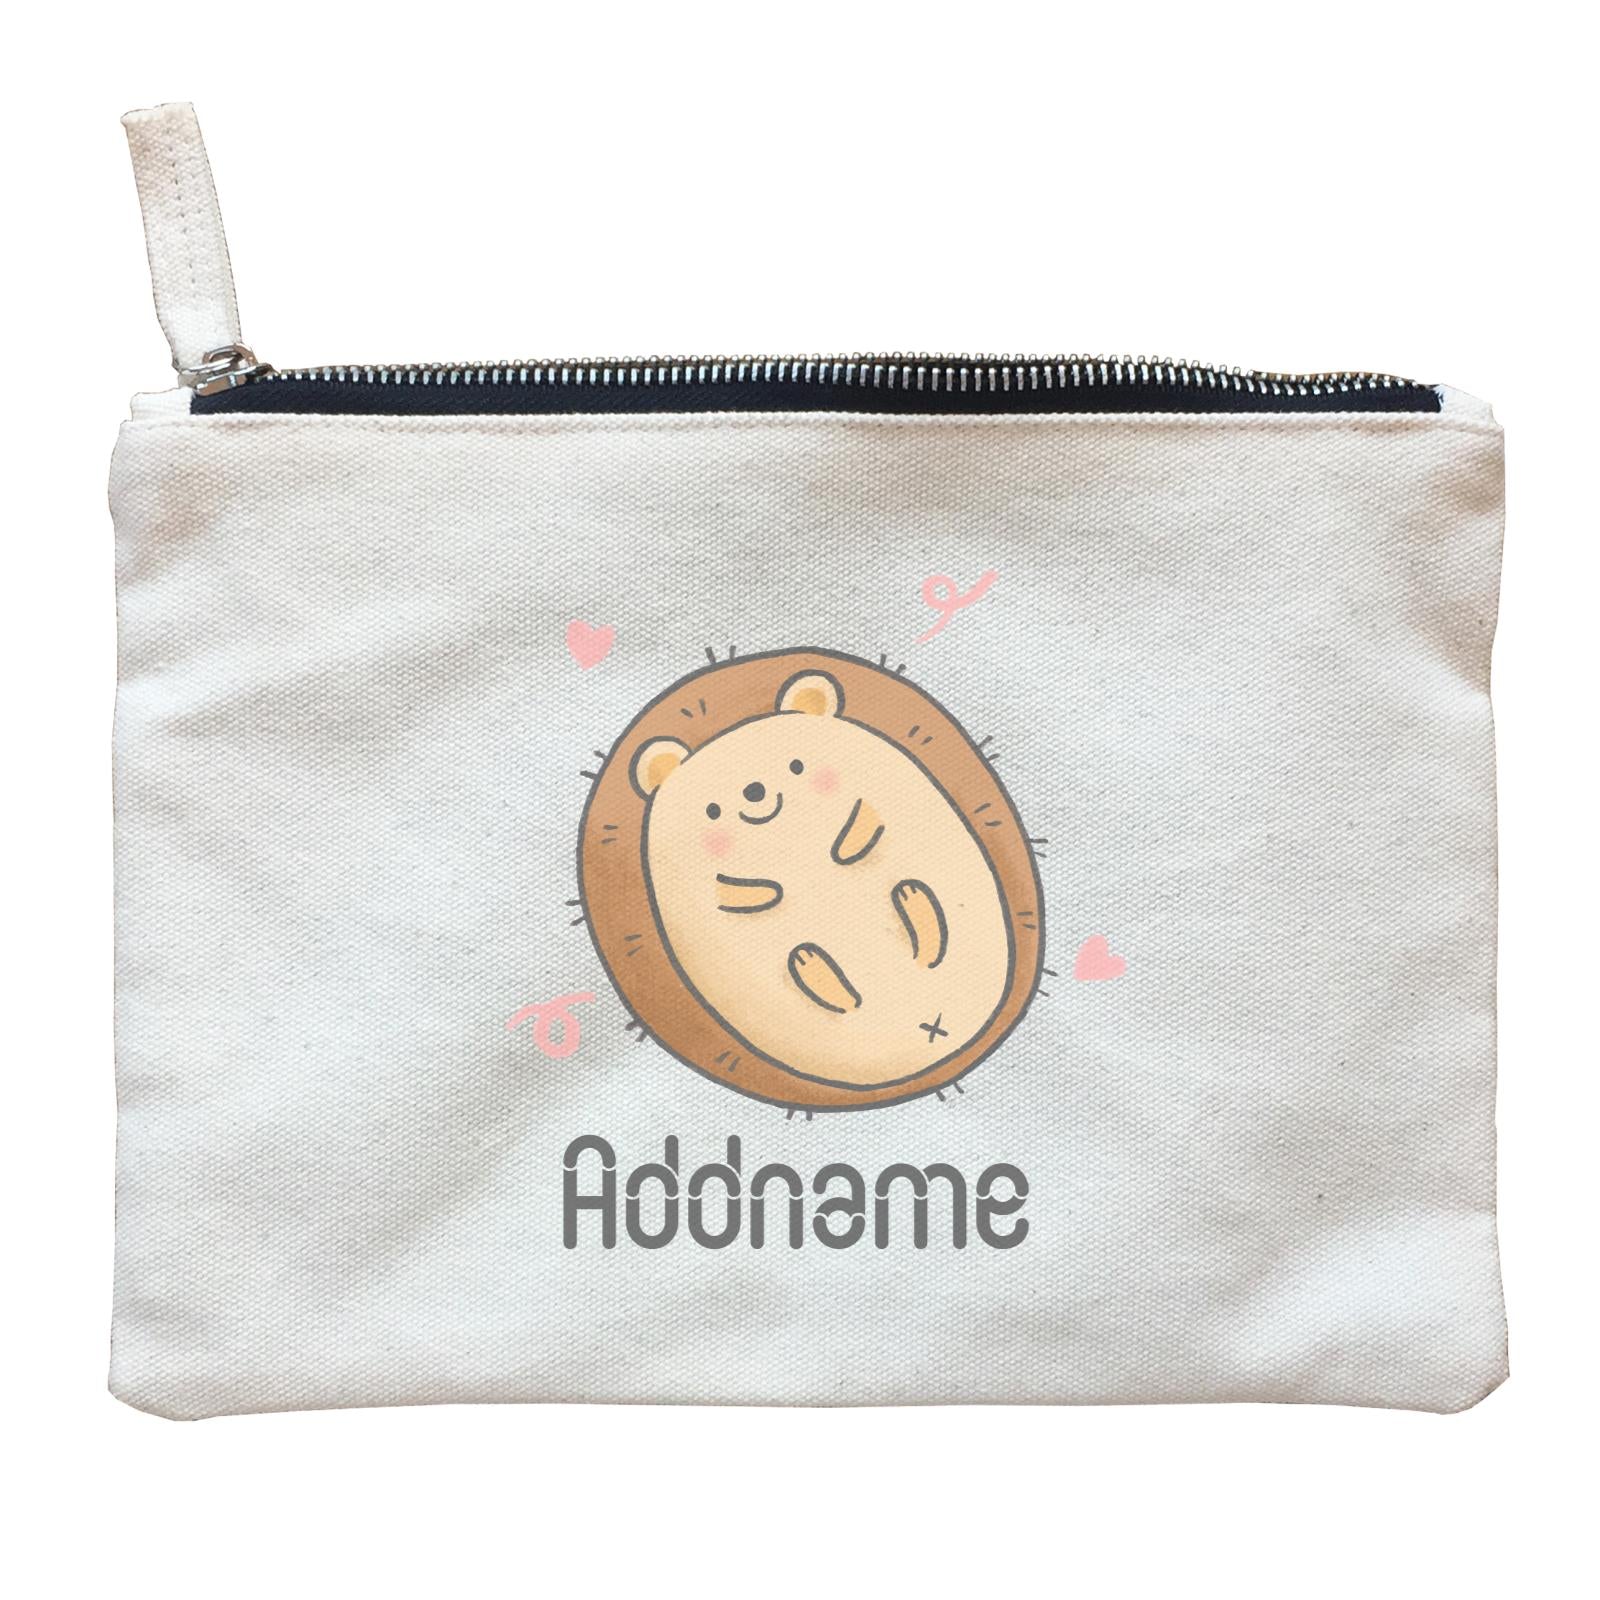 Cute Hand Drawn Style Porcupine Addname Zipper Pouch